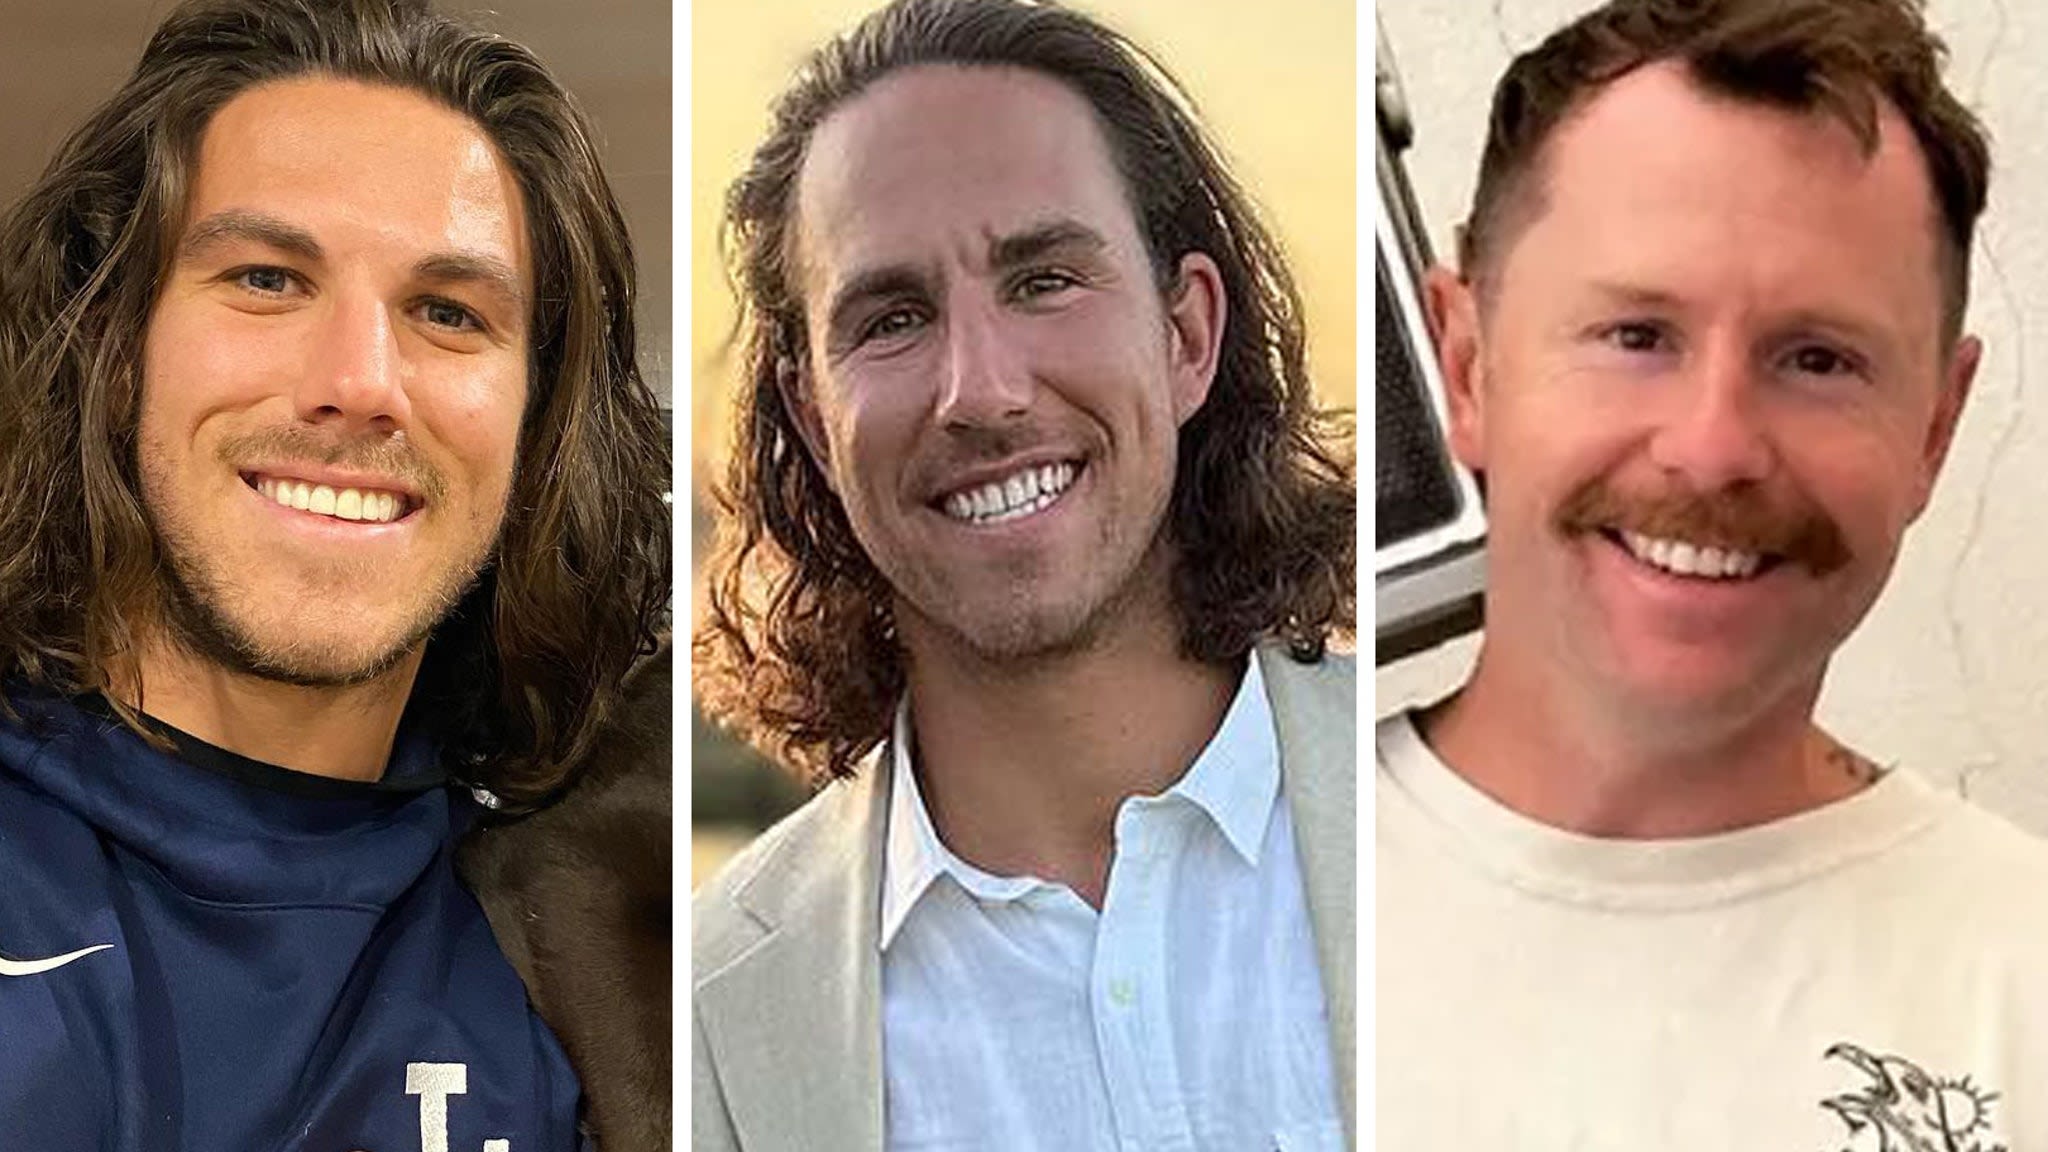 Three Surfers Dead In Mexico, Man Charged Reportedly Admitted Involvement to Girlfriend